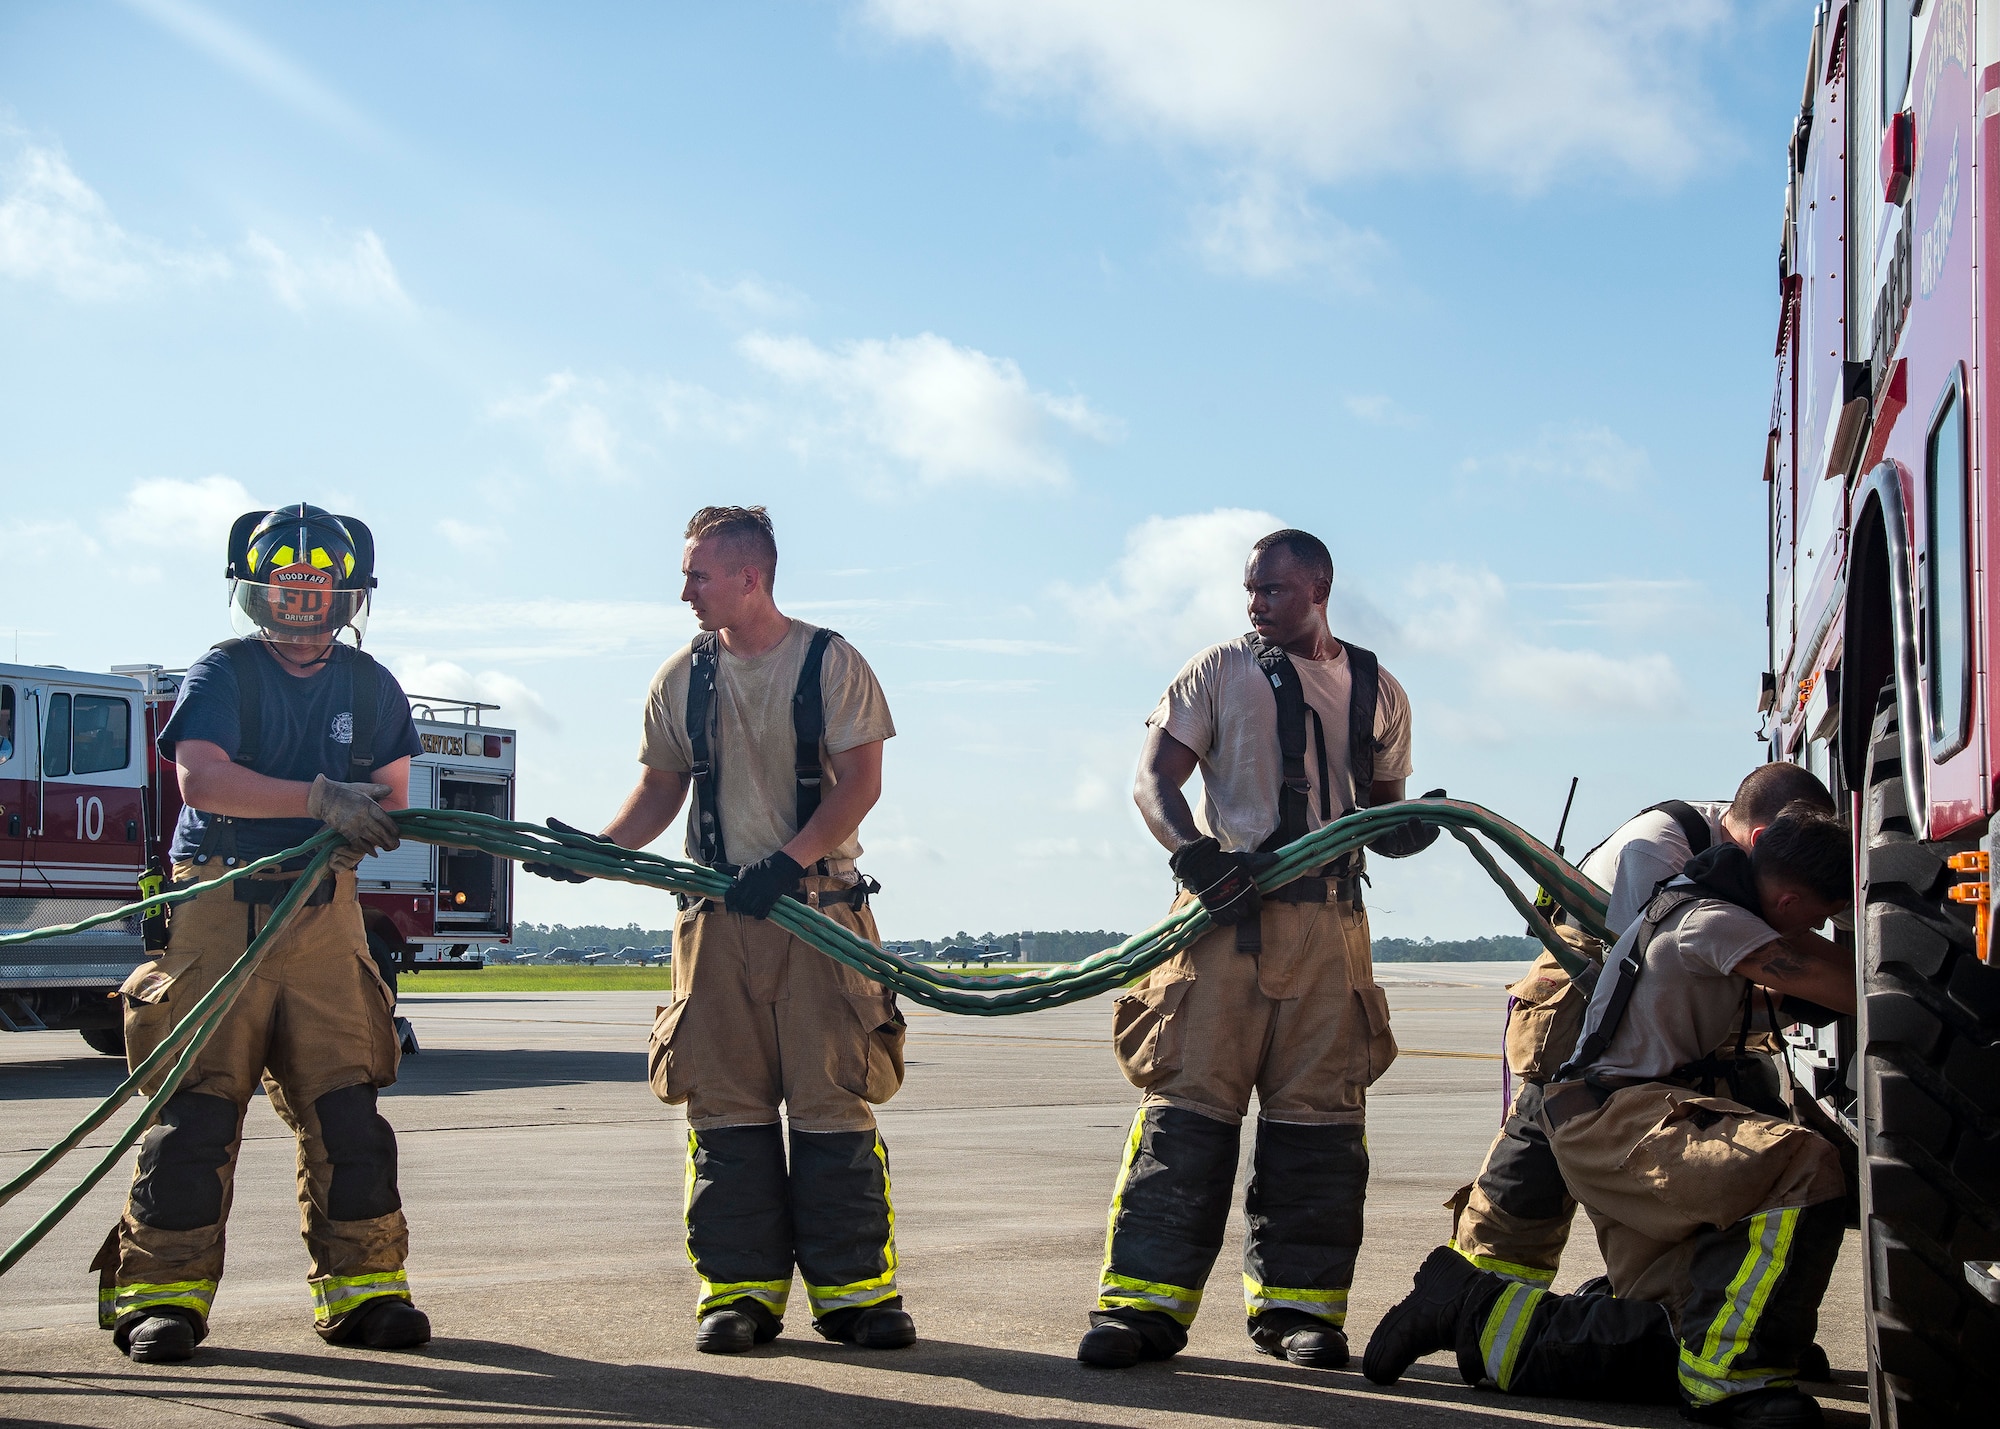 Firefighters from the 23d Civil Engineer Squadron (CES), put up a hose following HC-130J Combat King II egress training, July 11, 2019, at Moody Air Force Base, Ga. Firefighters conducted the training to evaluate their overall knowledge and proficiency of how to properly shut down and rescue personnel from a C-130 during an emergency situation. The training required the firefighters to properly enter and ventilate the aircraft while conducting swift rescue techniques to safely locate and remove passengers from the aircraft. (U.S. Air Force photo by Airman 1st Class Eugene Oliver)